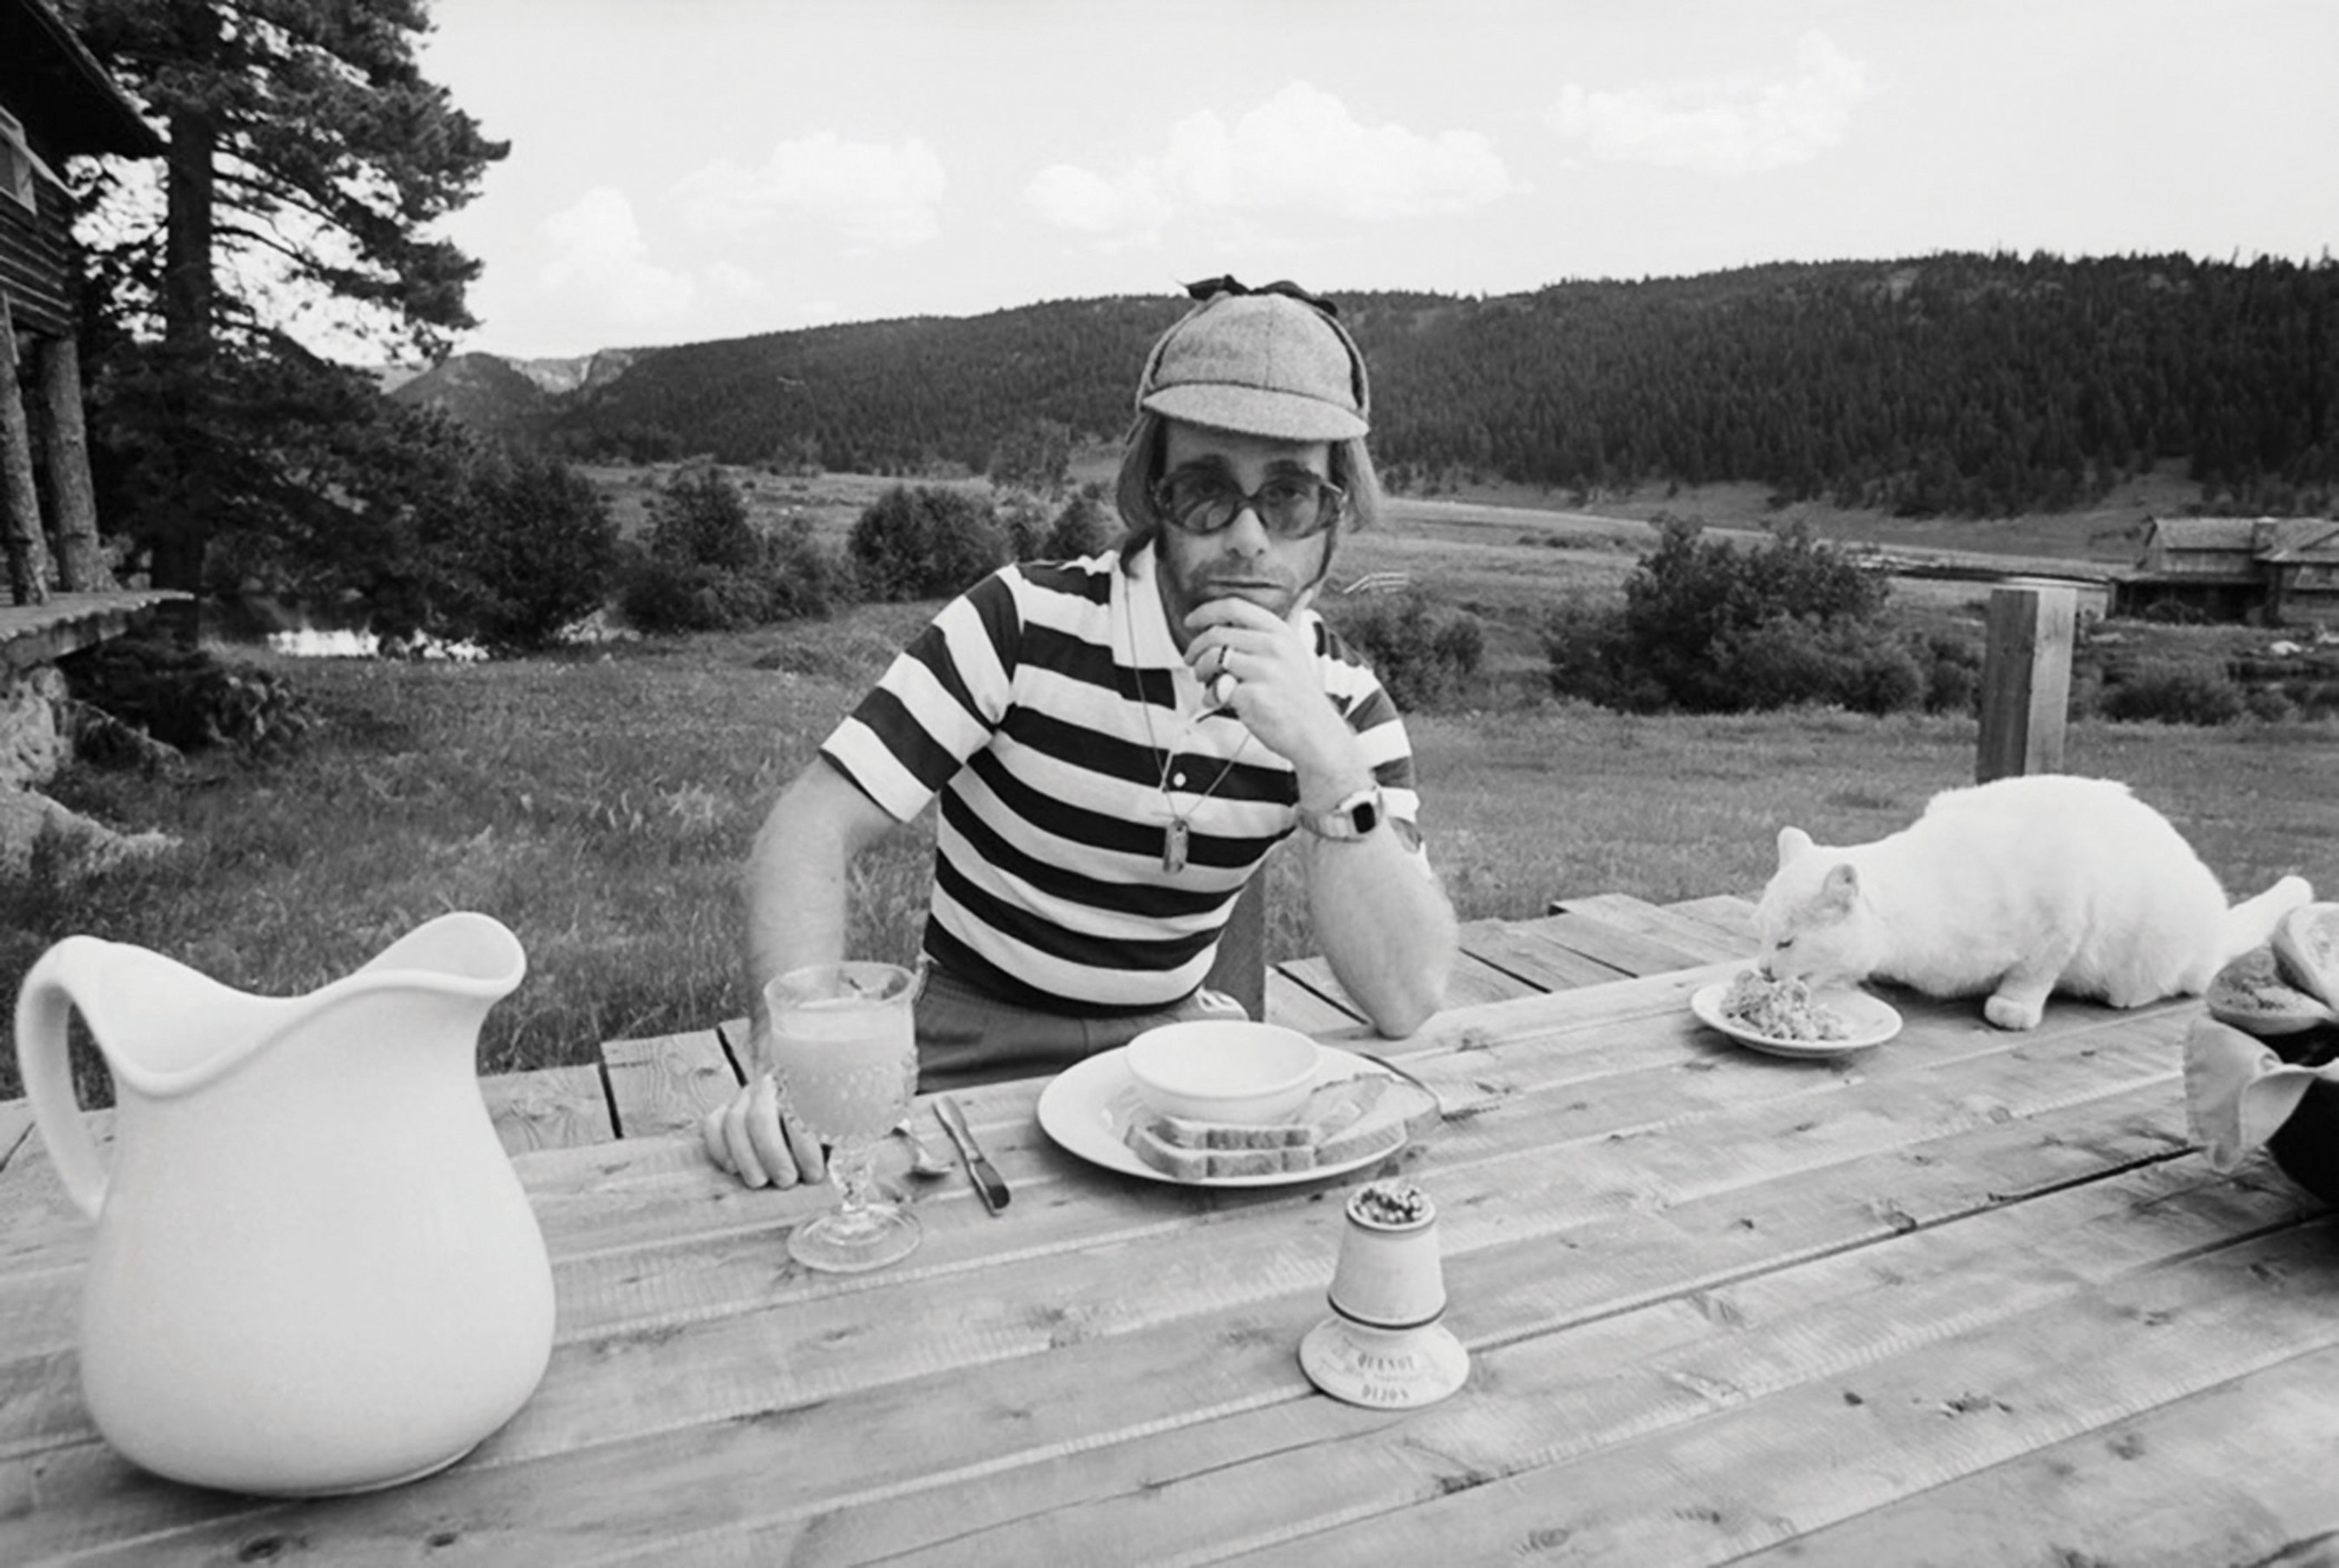 Elton John at Caribou Ranch, where he recorded three albums, with a porcelain dinner service available at auction by Leslie Hindman Auctioneers on January 24. The dinner service includes 189 items total, including the pitcher, plate and bowl pictured here. Both the indoor and outdoor furniture used in the Mess Hall and Lodge are also for sale. The Lodge is where artists such as Al Green and Billy Joel stayed while at Caribou Ranch.